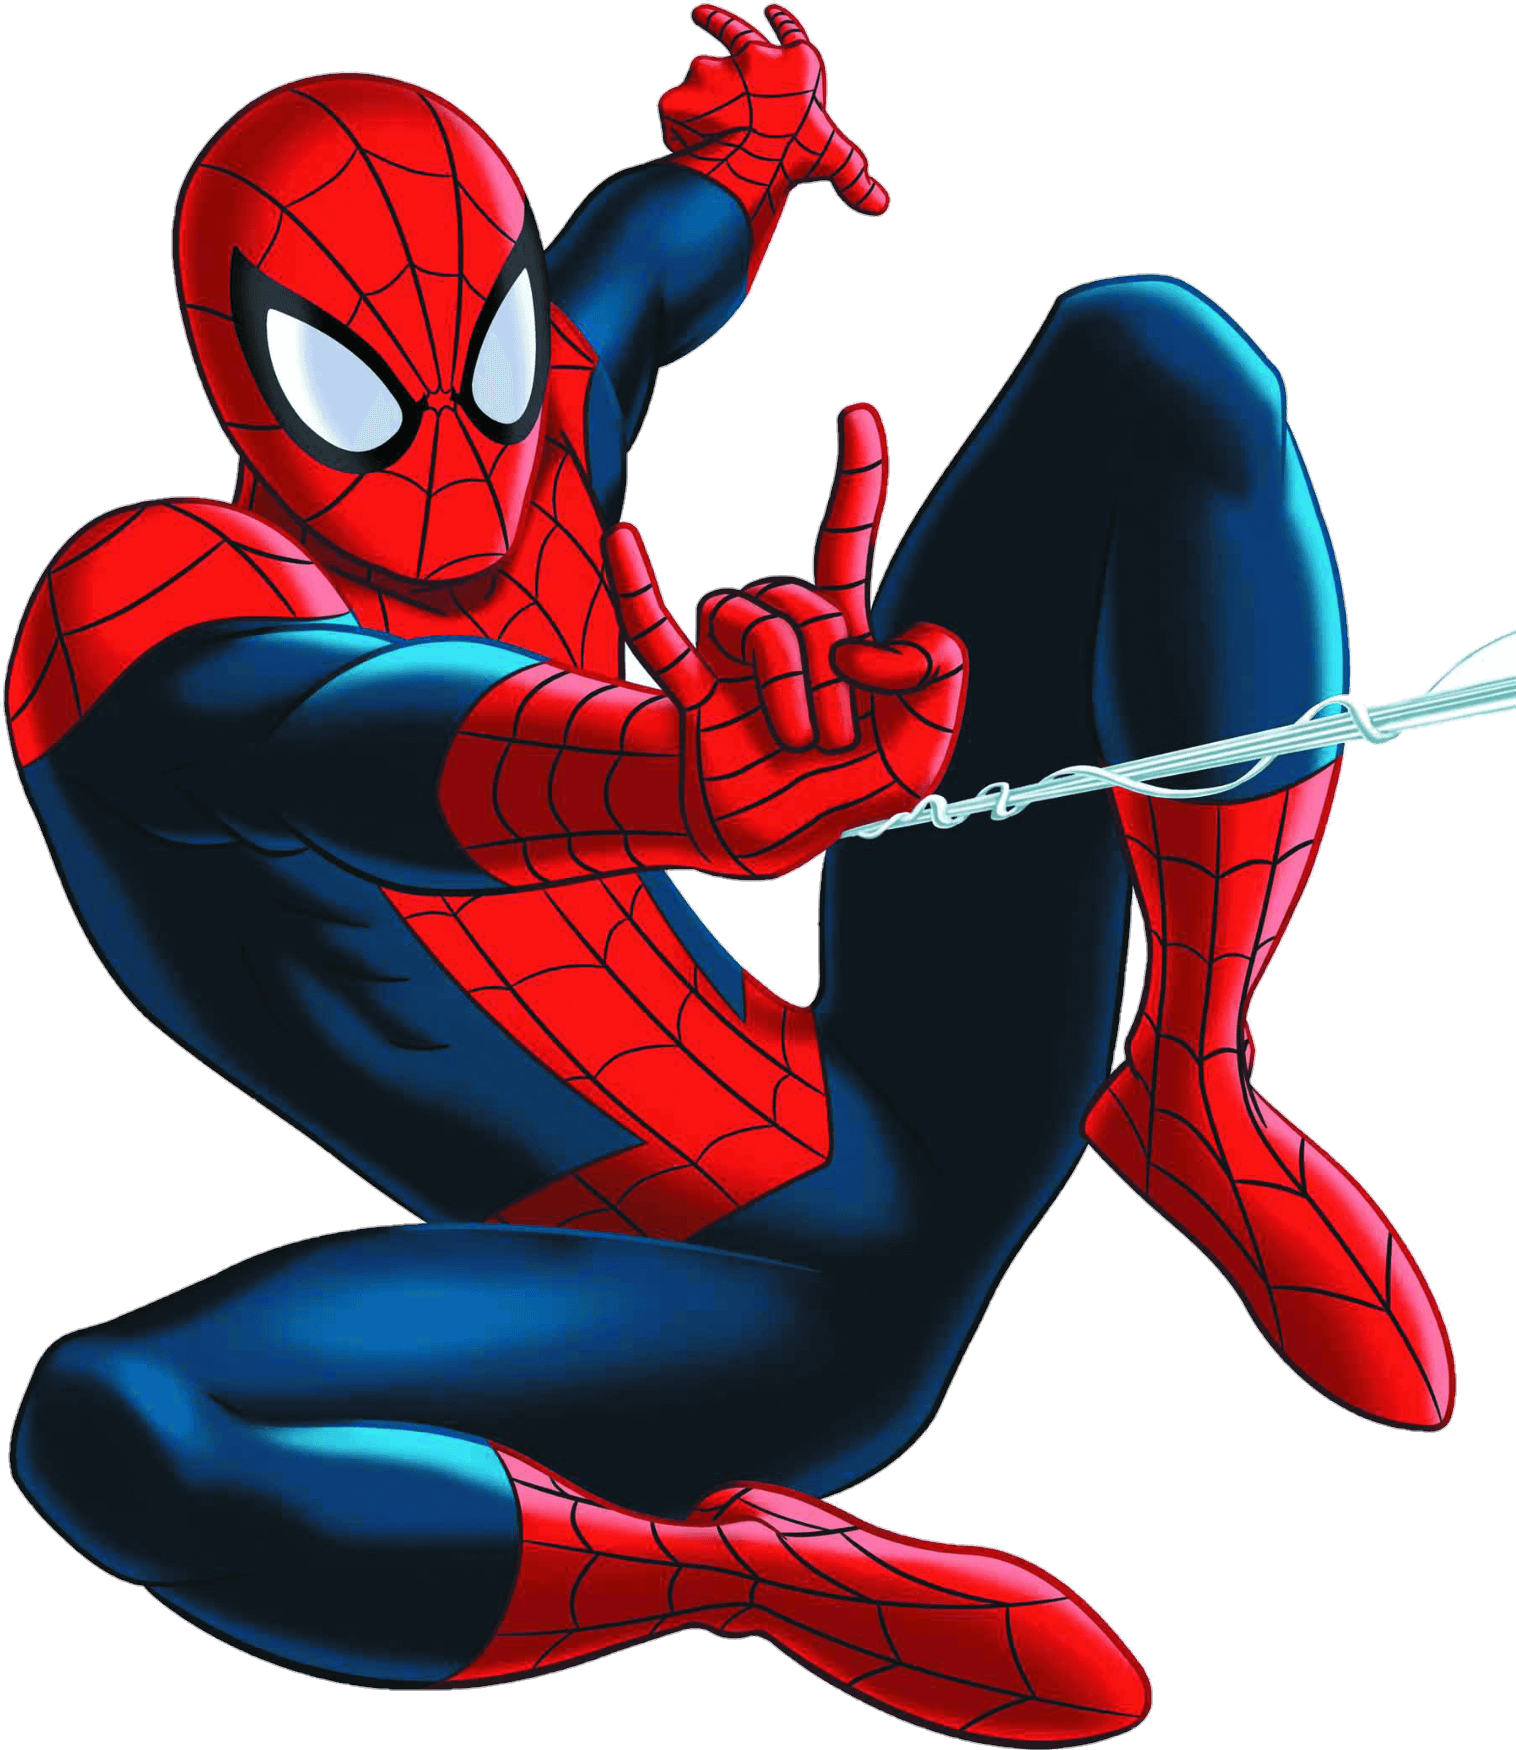 spider-man-png-from-pngfre-45